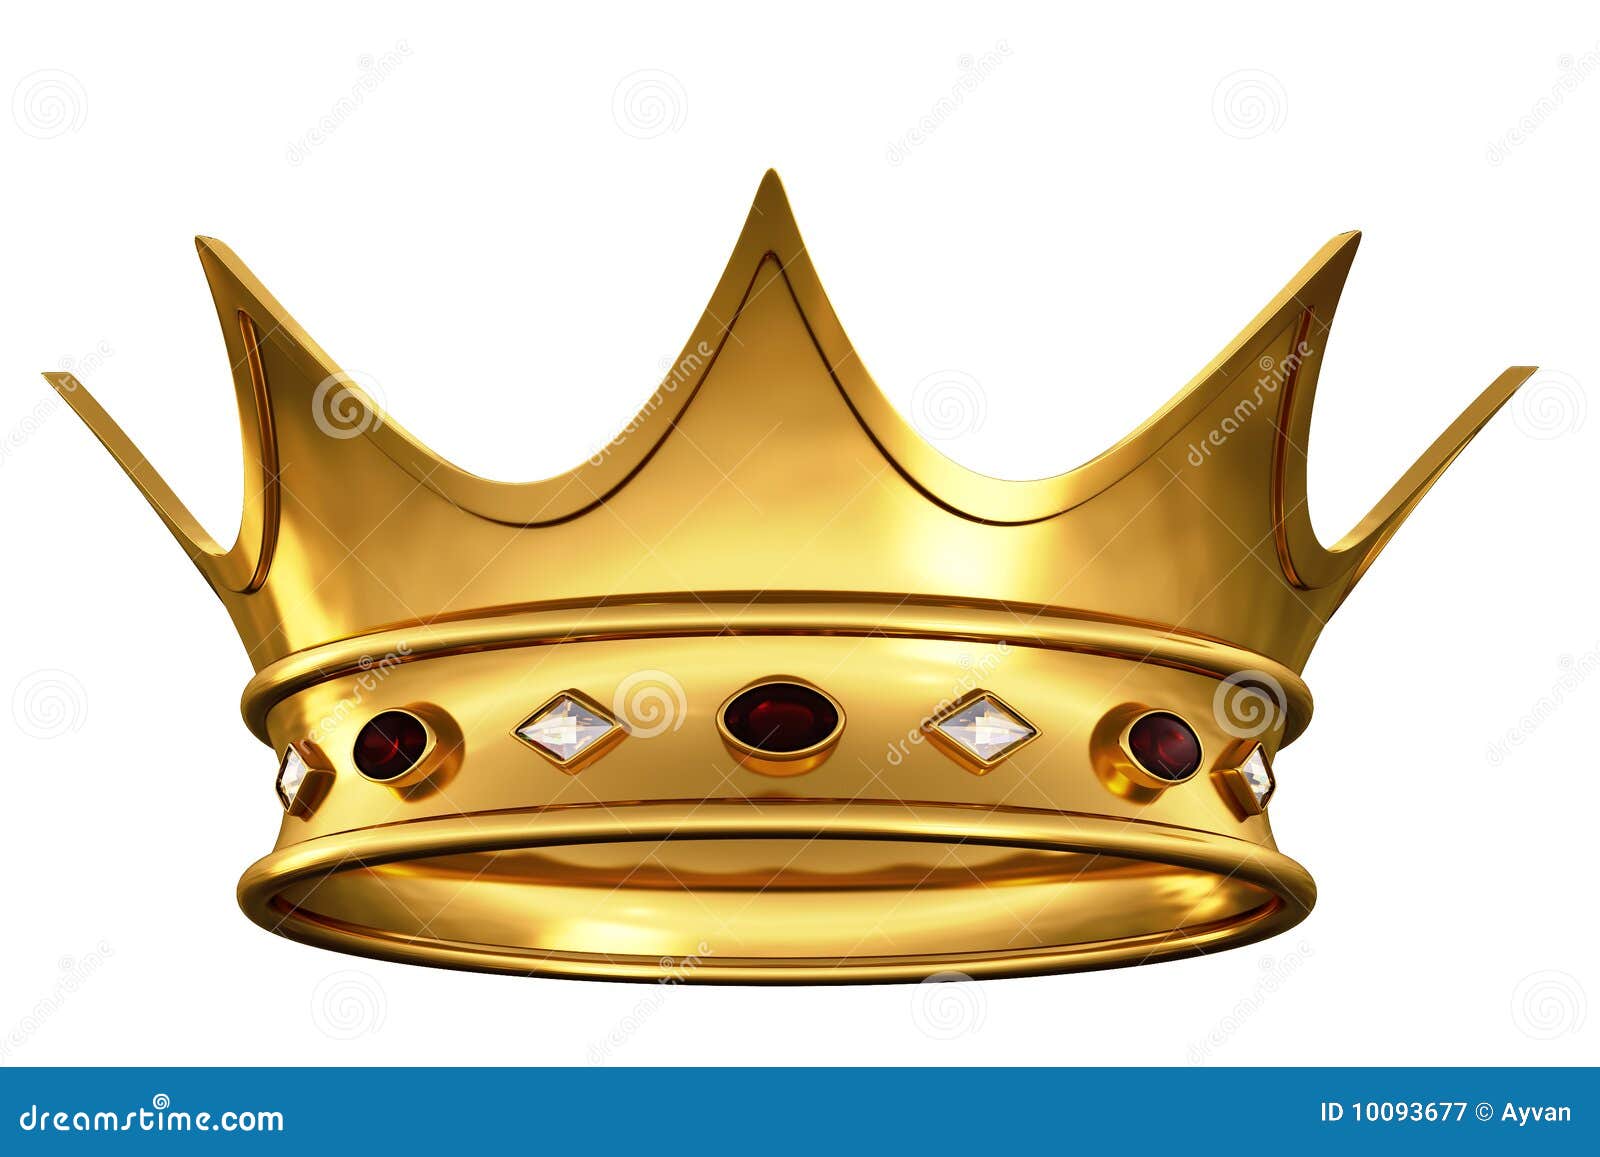 royalty free crown clipart - photo #41